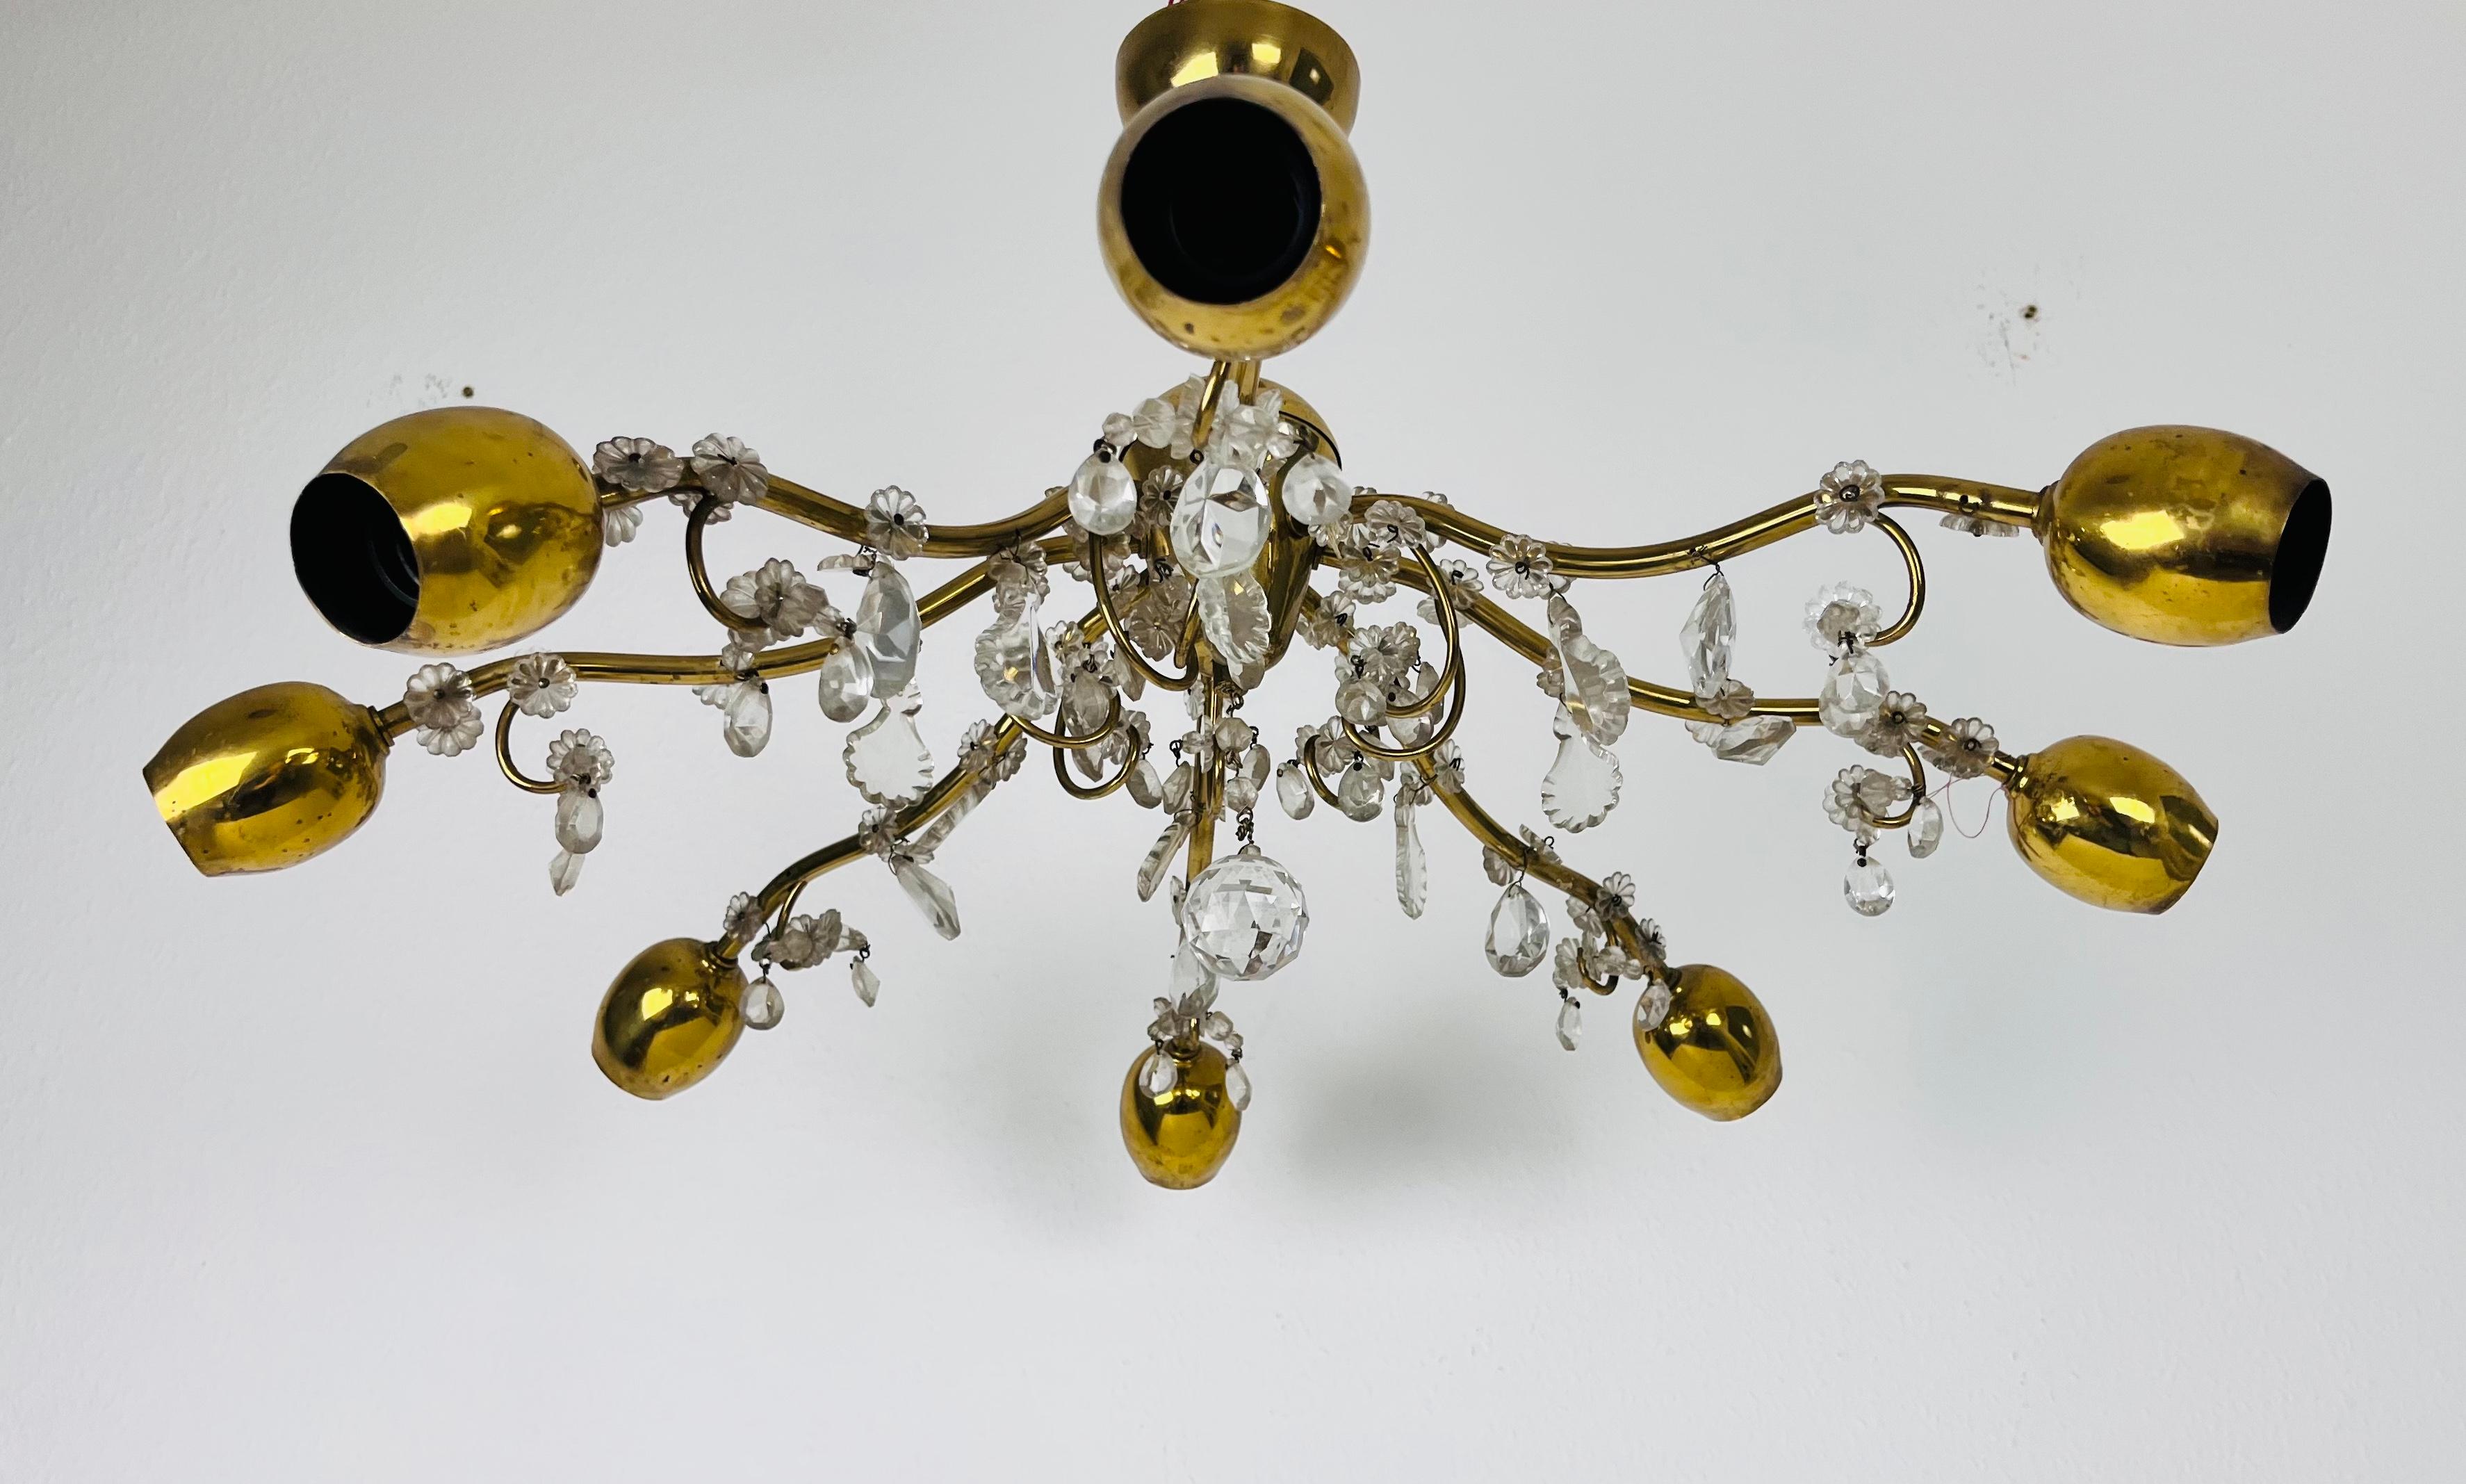 A Sputnik chandelier made by Lobmeyr in the 1960s. It is fascinating with its brass and crystal arms, each of it with an E14 light bulb. The shape of the light is similar to a spider.

The light requires 8 E14 light bulbs. Works with both